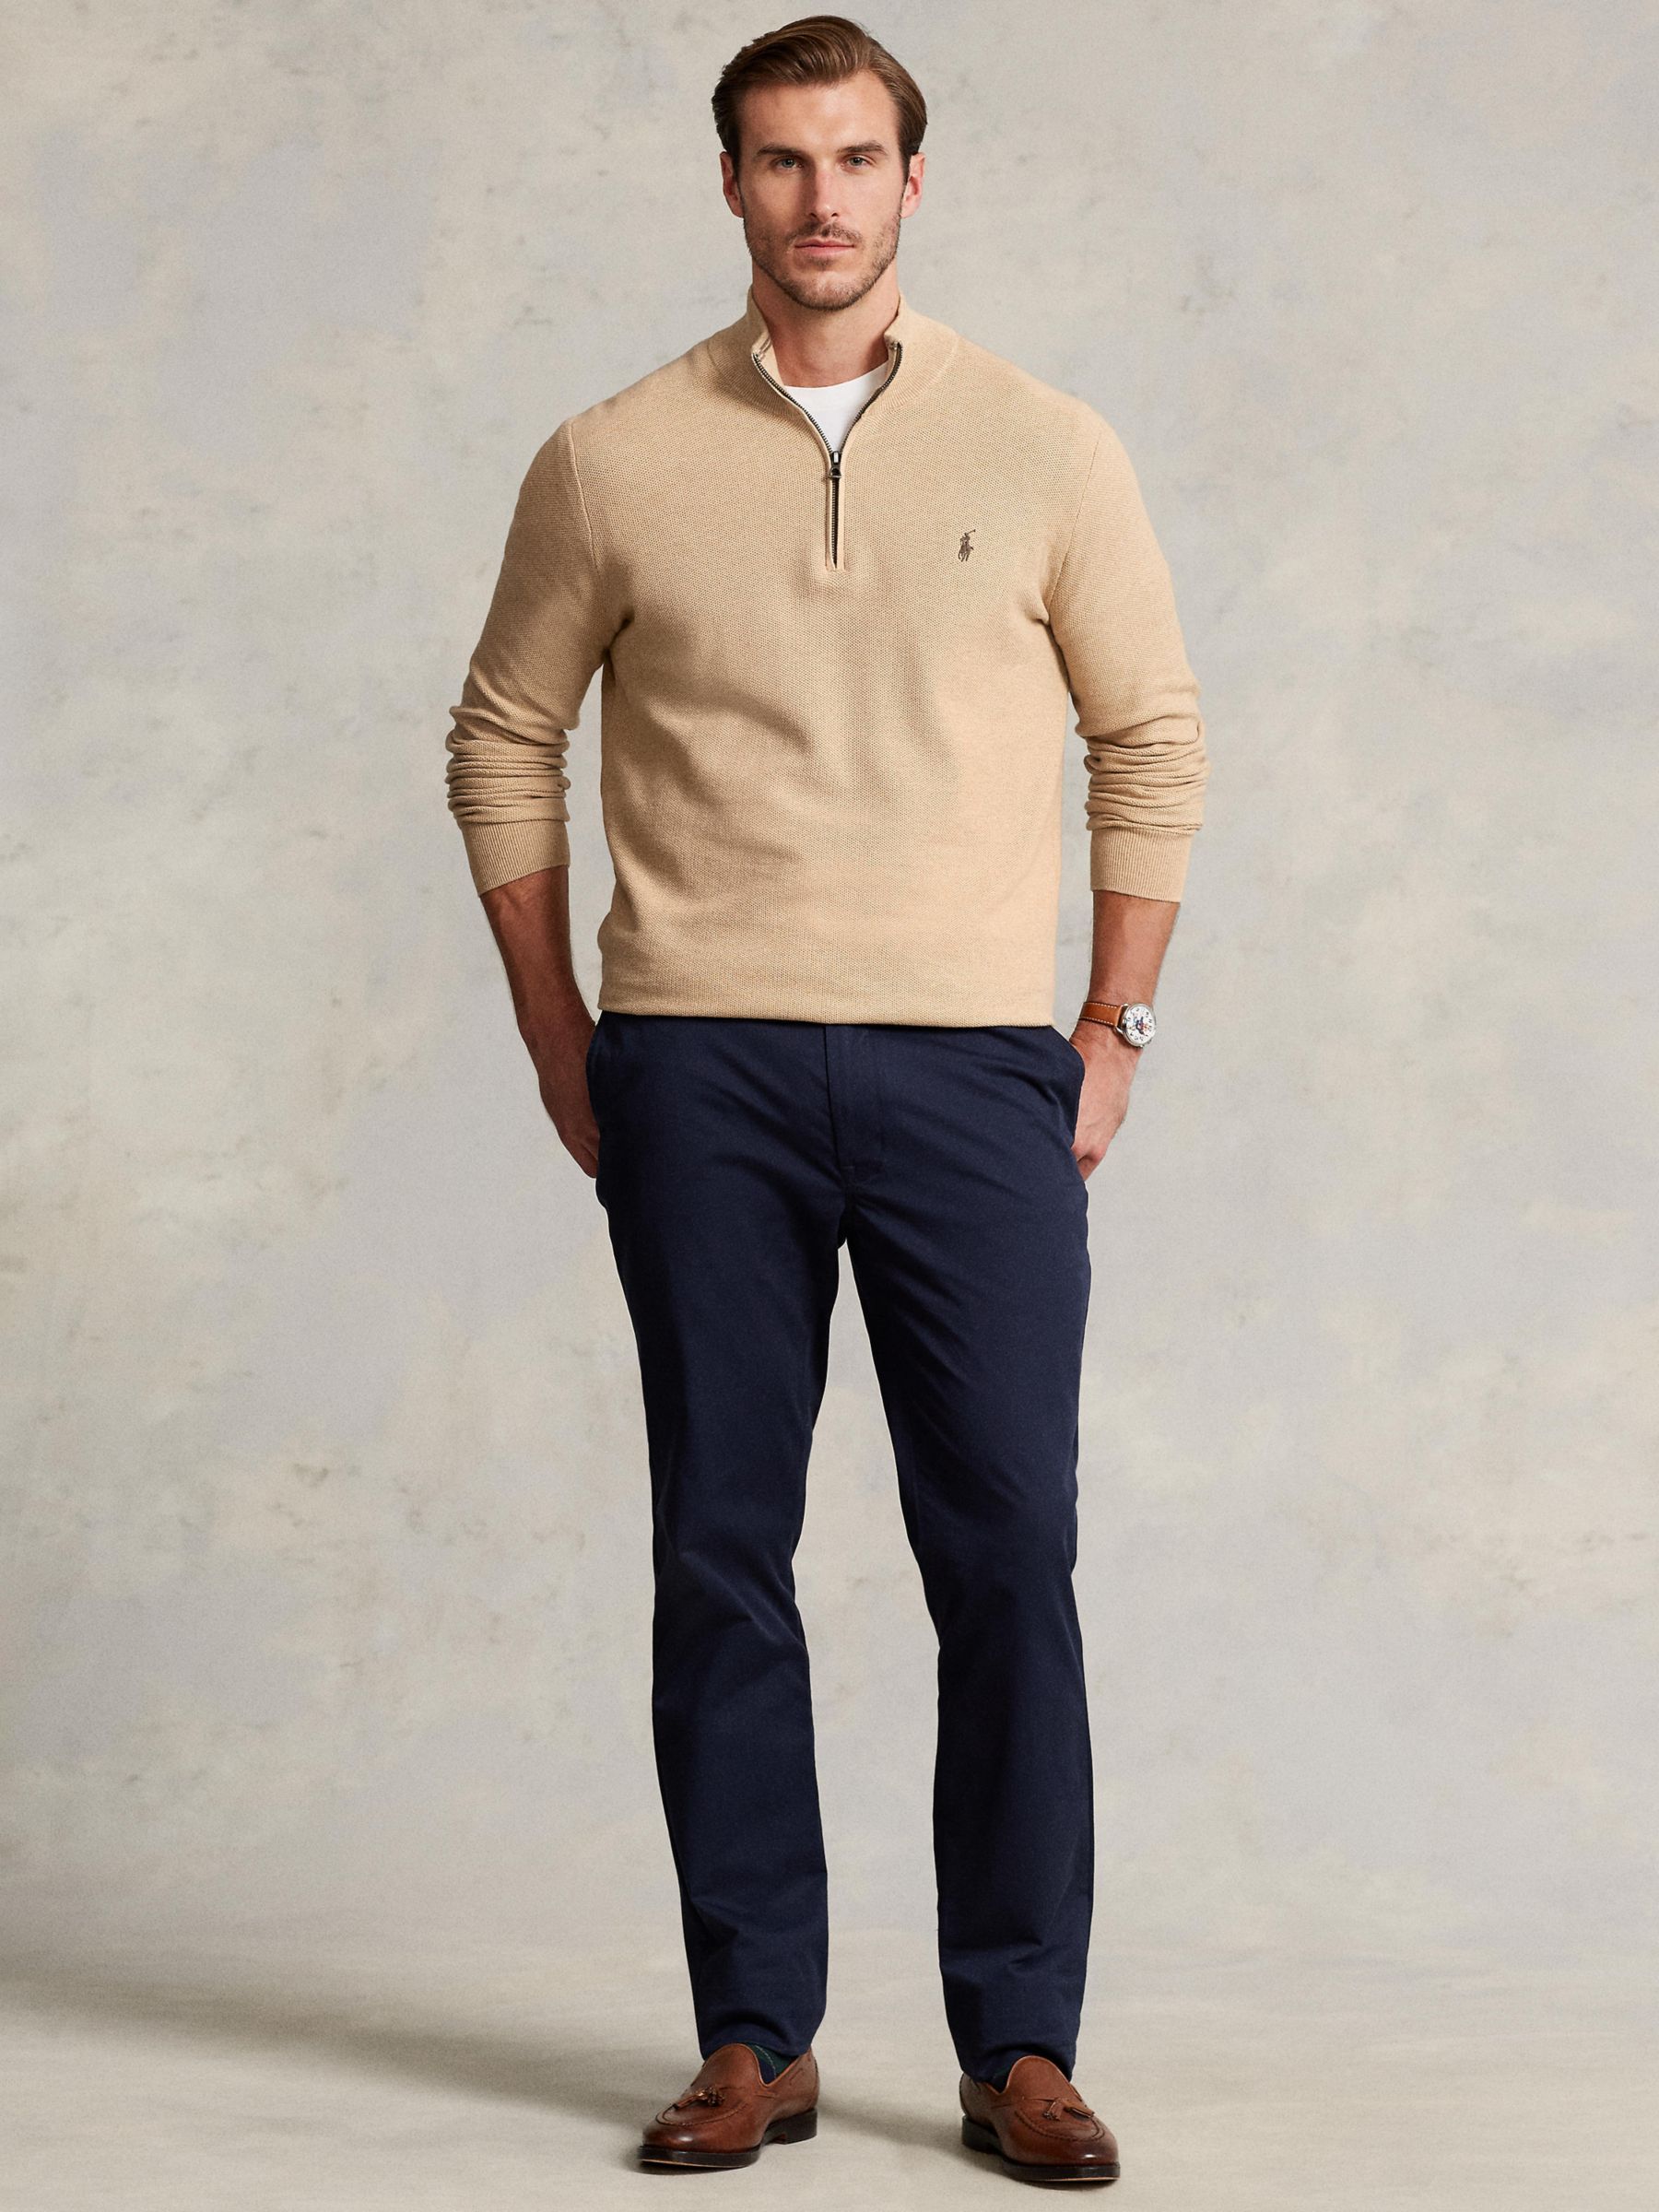 Big And Tall Men's Clothing | John Lewis & Partners